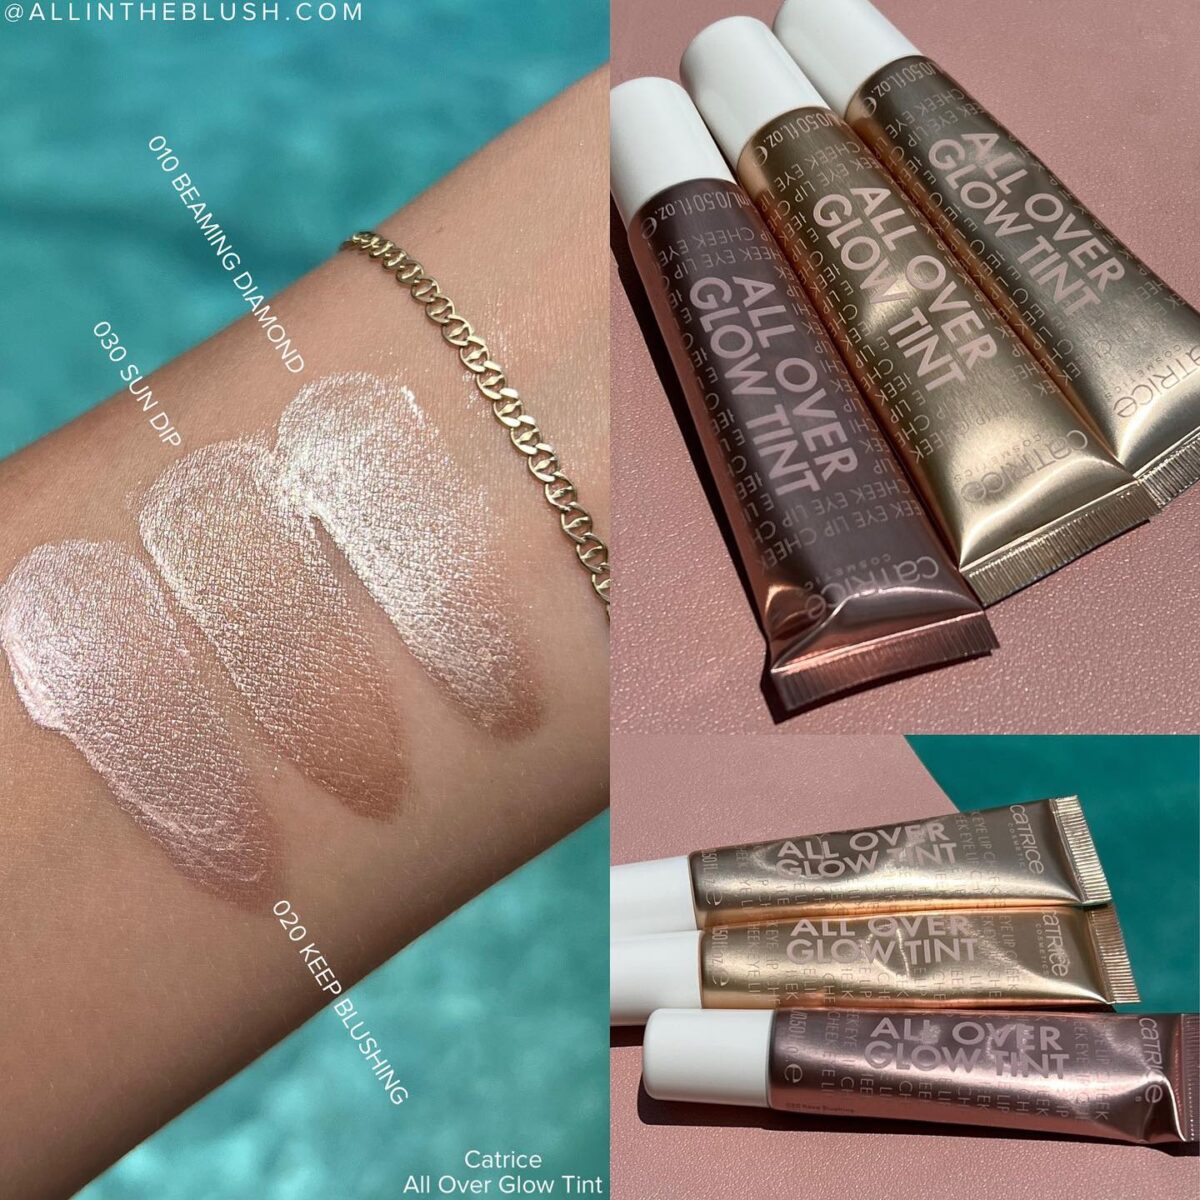 Catrice All Over Glow Tint Review & Swatches